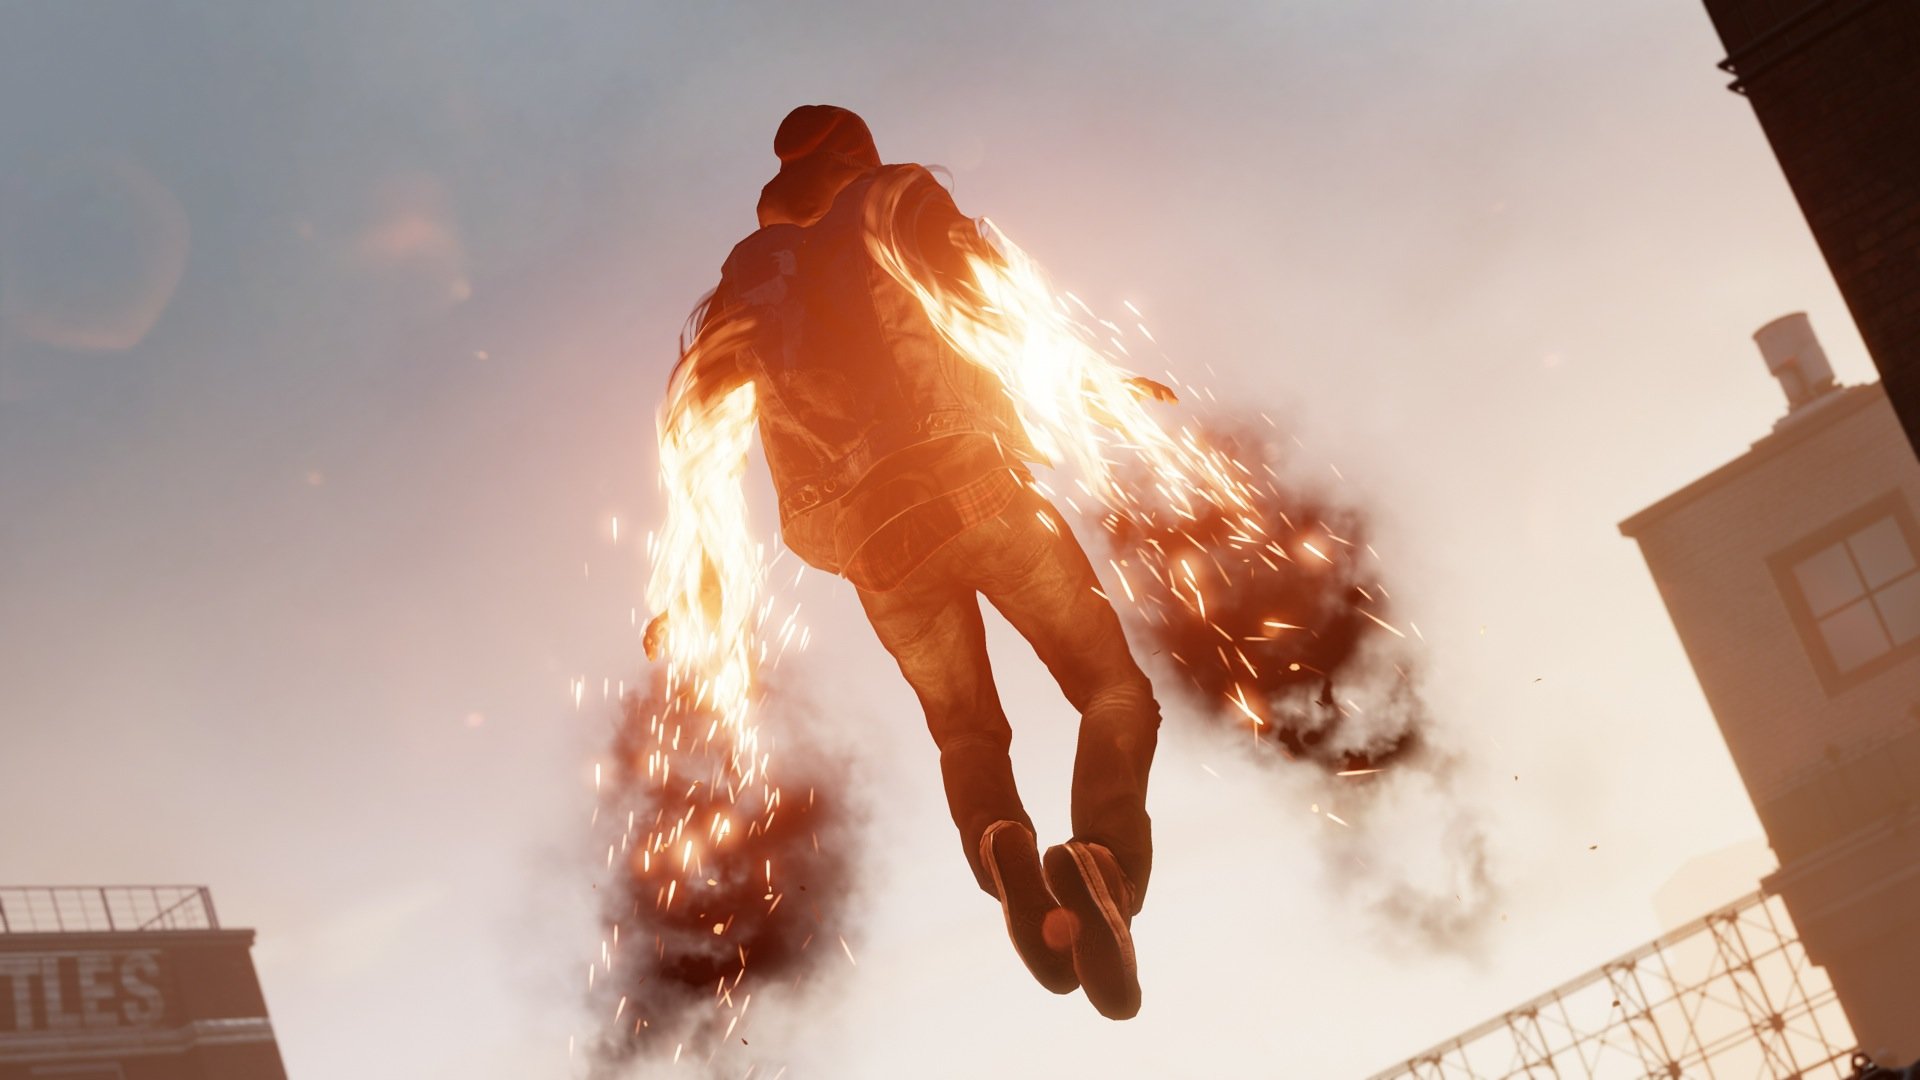 Best InFAMOUS: Second Son wallpaper ID:270097 for High Resolution full hd 1920x1080 PC